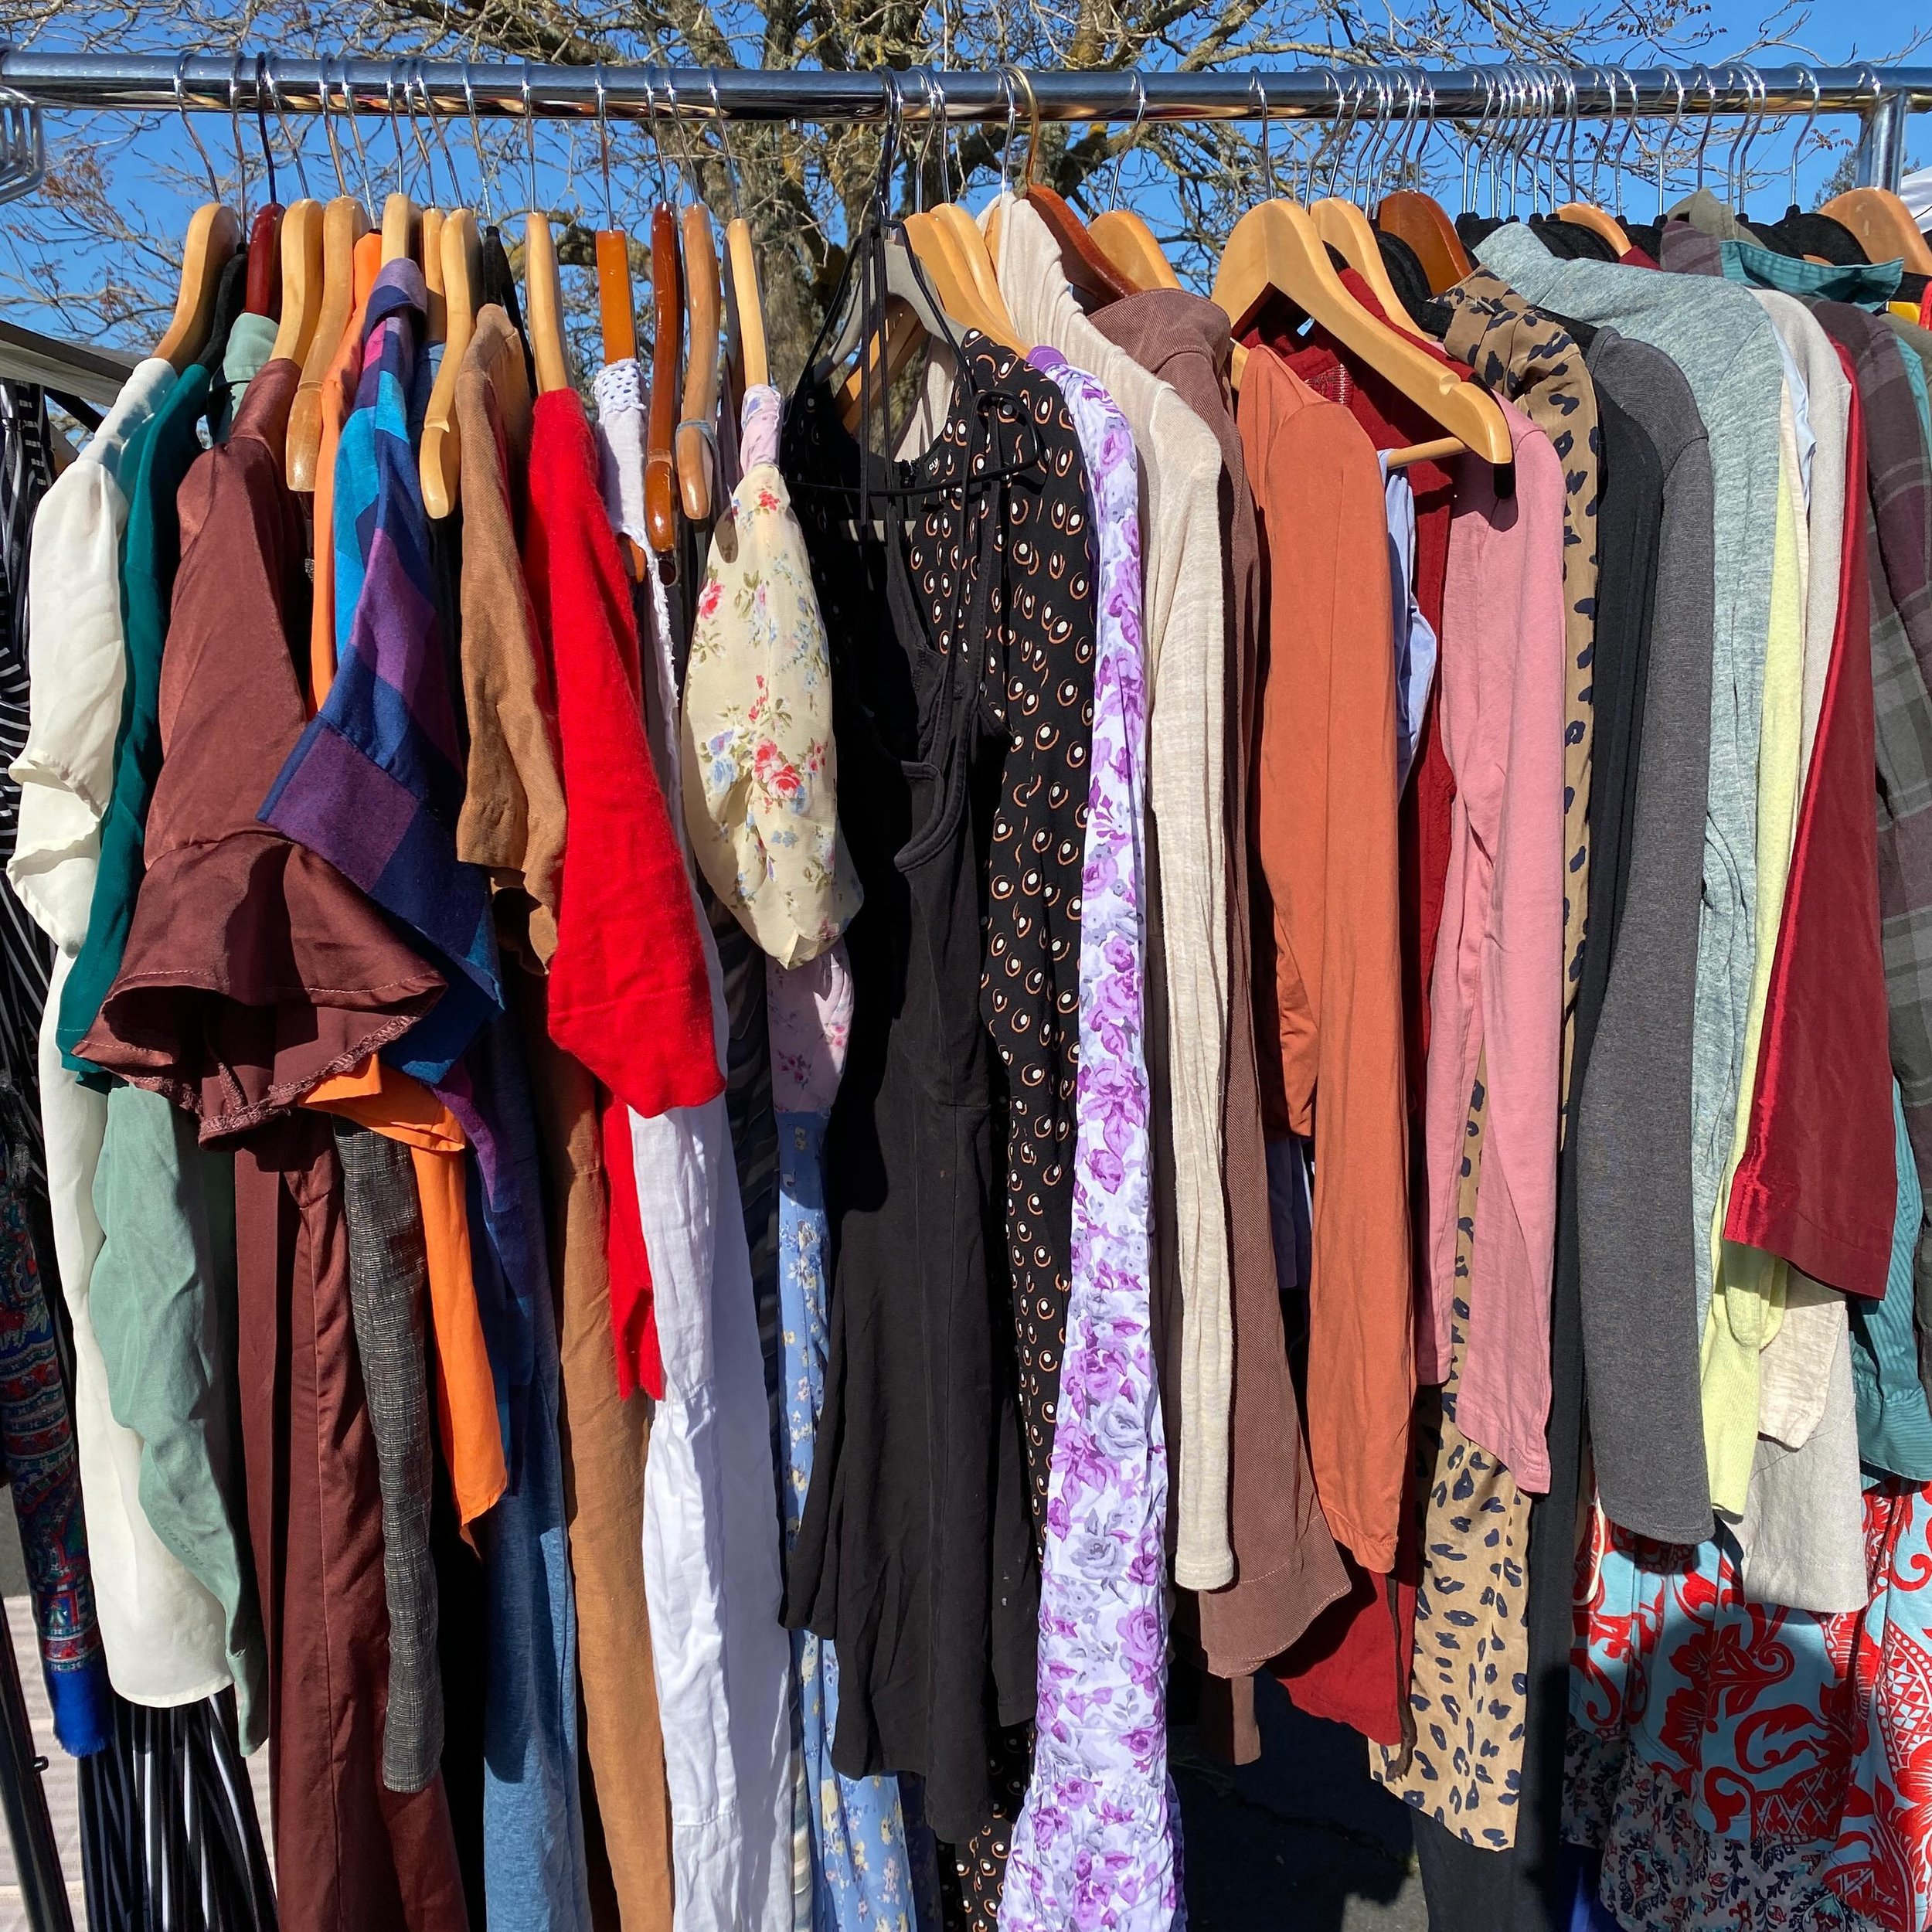 We had a great Clothes Swap on Saturday - sending over 100 items to new homes and donating the remainders.

Couldn&rsquo;t make it but still want a spring wardrobe update?  Consider hosting a clothing swap party with friends!  Or join us in Windsor o